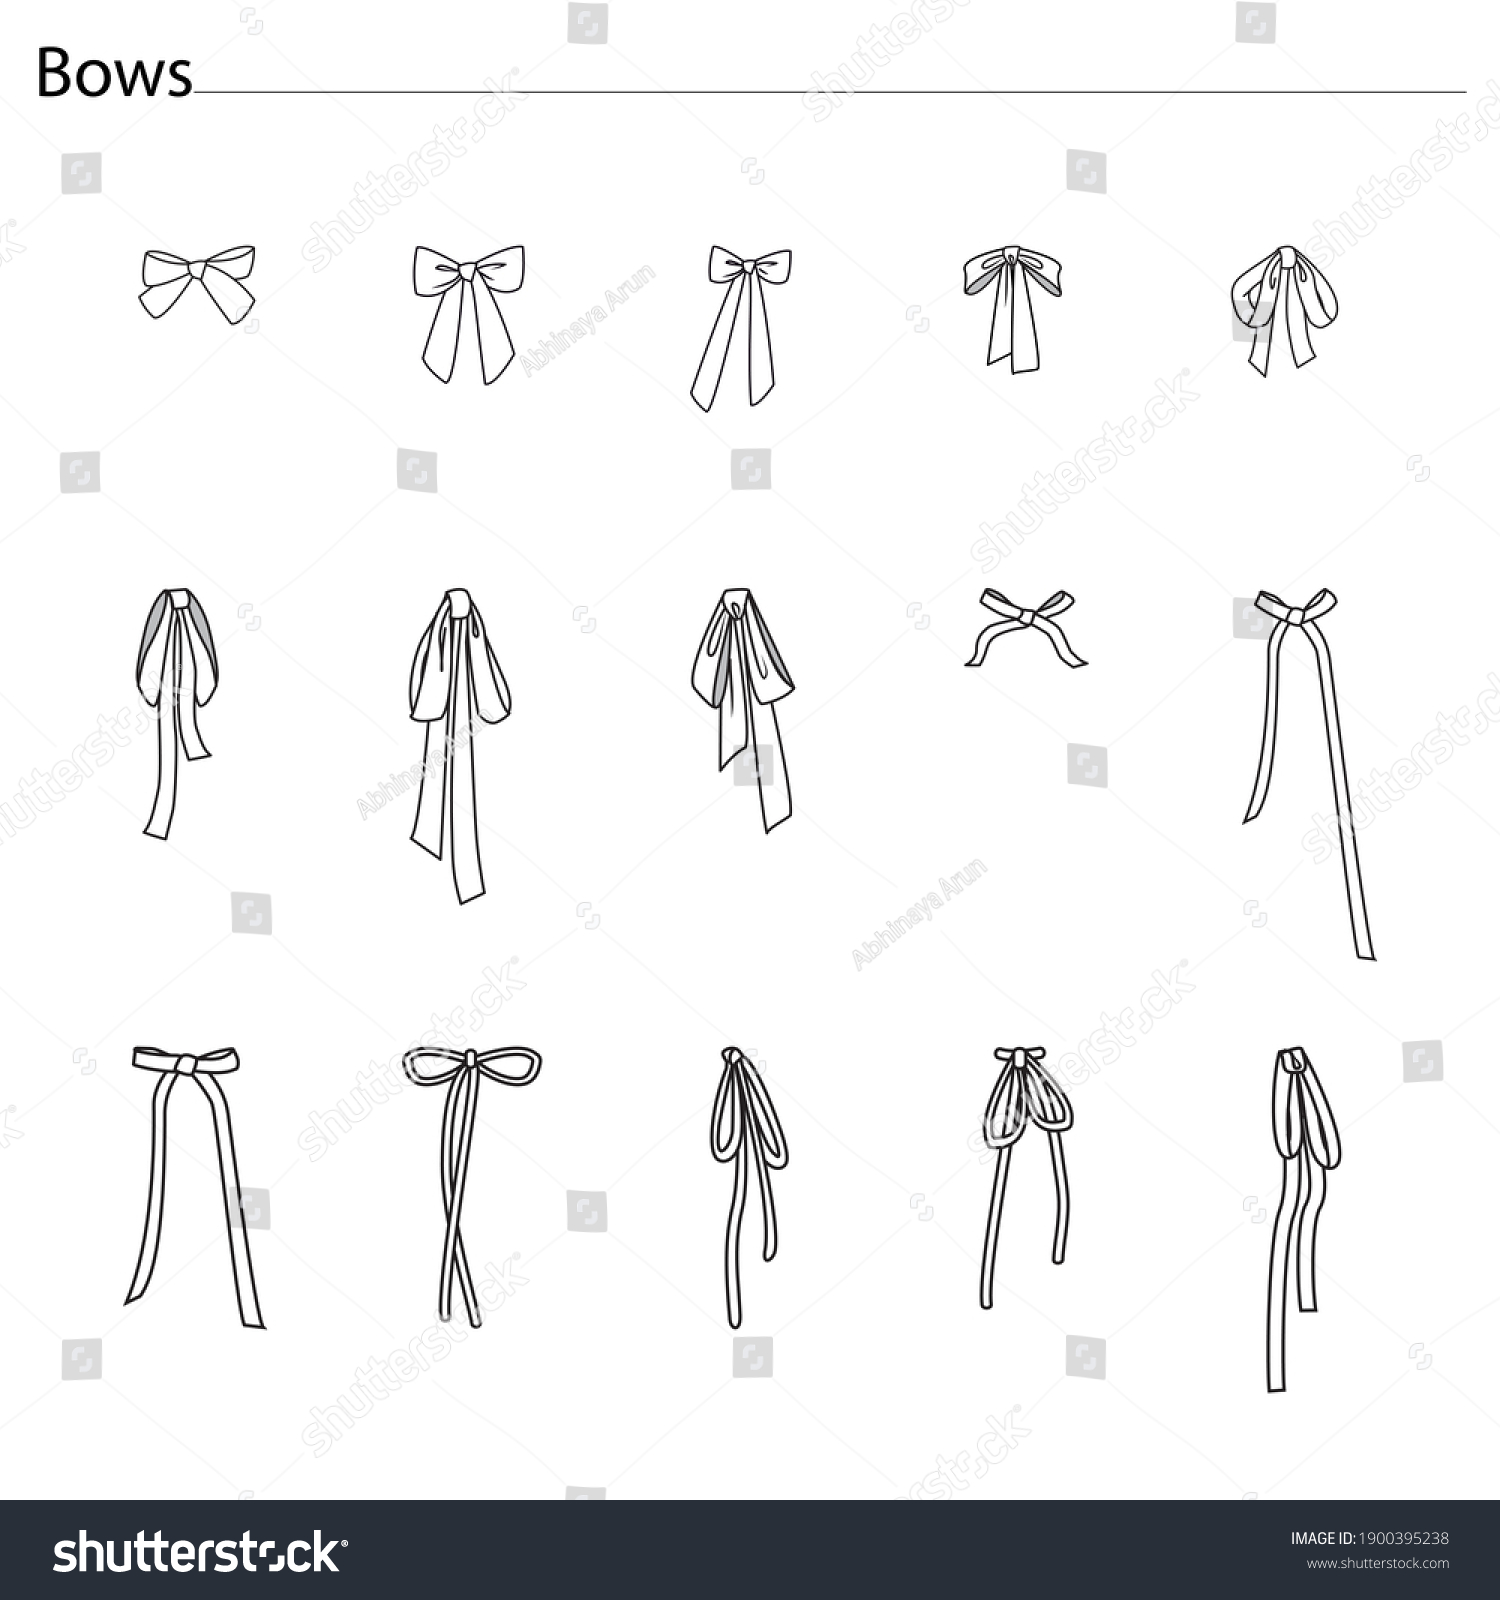 Different Types Bow Sketches Stock Illustration 1900395238